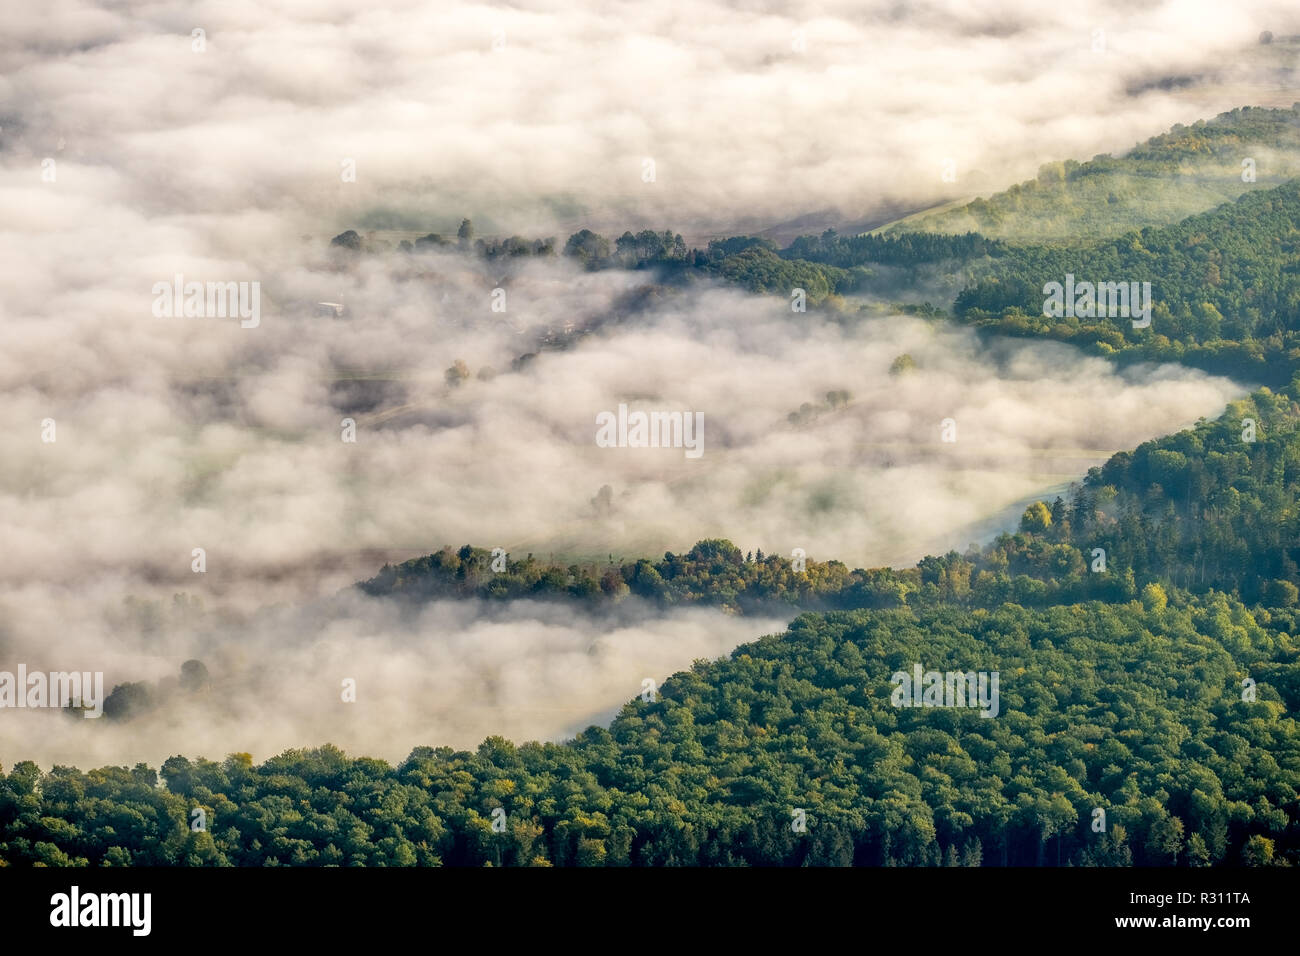 Aerial view, fog over whale area next to Dassel, Goslar district, Lower Saxony, Germany, Europe, Dassel, Goslar district, DEU, birds-eyes view, aerial Stock Photo